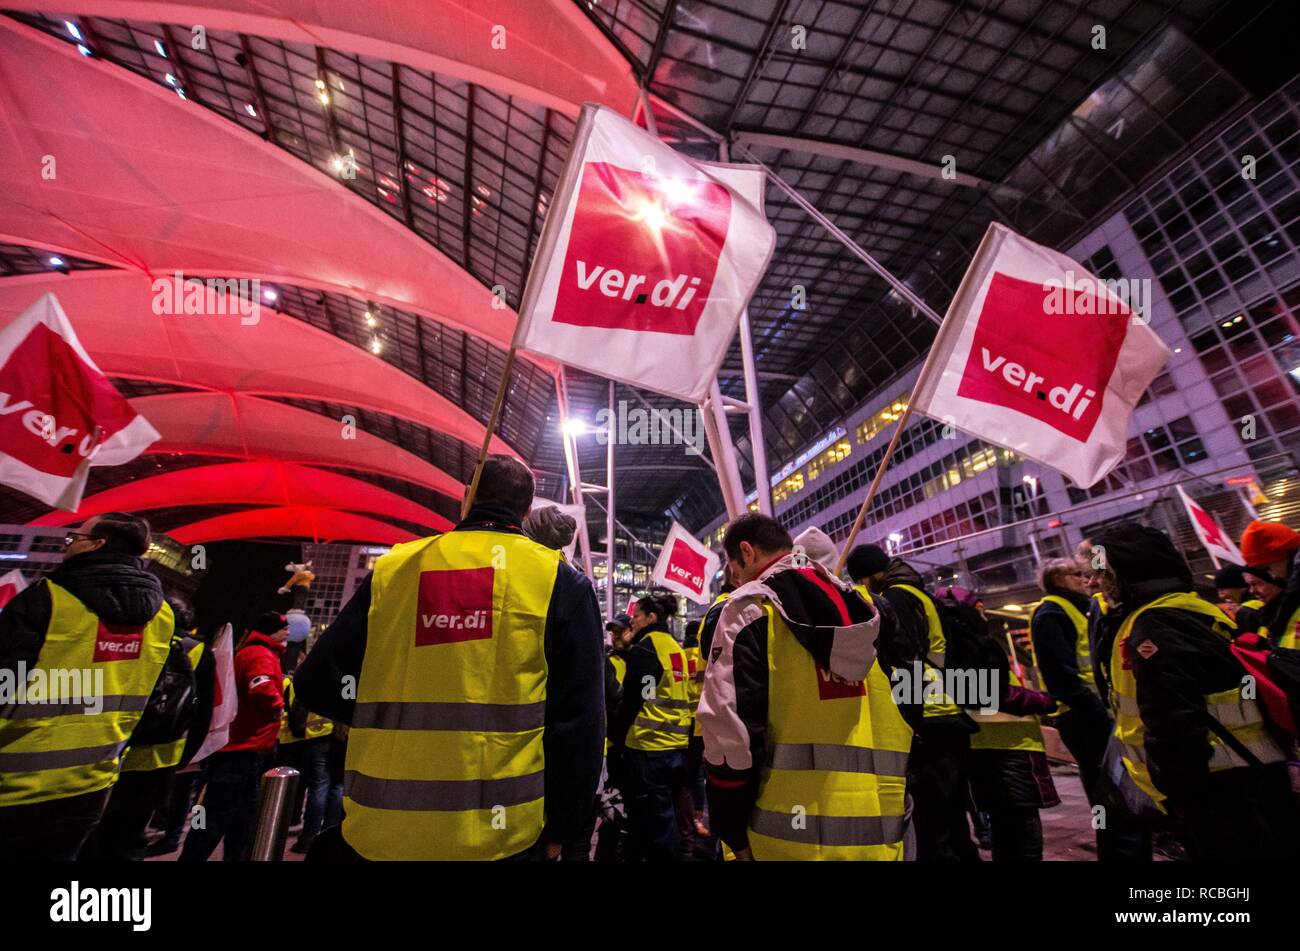 Munich, Bavaria, Germany. 15th Jan, 2019. The flags of the Verdi union representing the striking security workers at the Munich International Airport. Citing a breakdown in talks with employers on December 21st, the German Ver.di union organized the latest warning strike in a series at the Munich International Airport with members employed in Airport Security Services (Luftsicherheit) walking out from 3:30am to 24:00. The union is demanding 20 Euros per hour for their 23,000 total members working in Passenger-, Freight, Personnel, and Goods Control of Airport Security, along with recertif Stock Photo